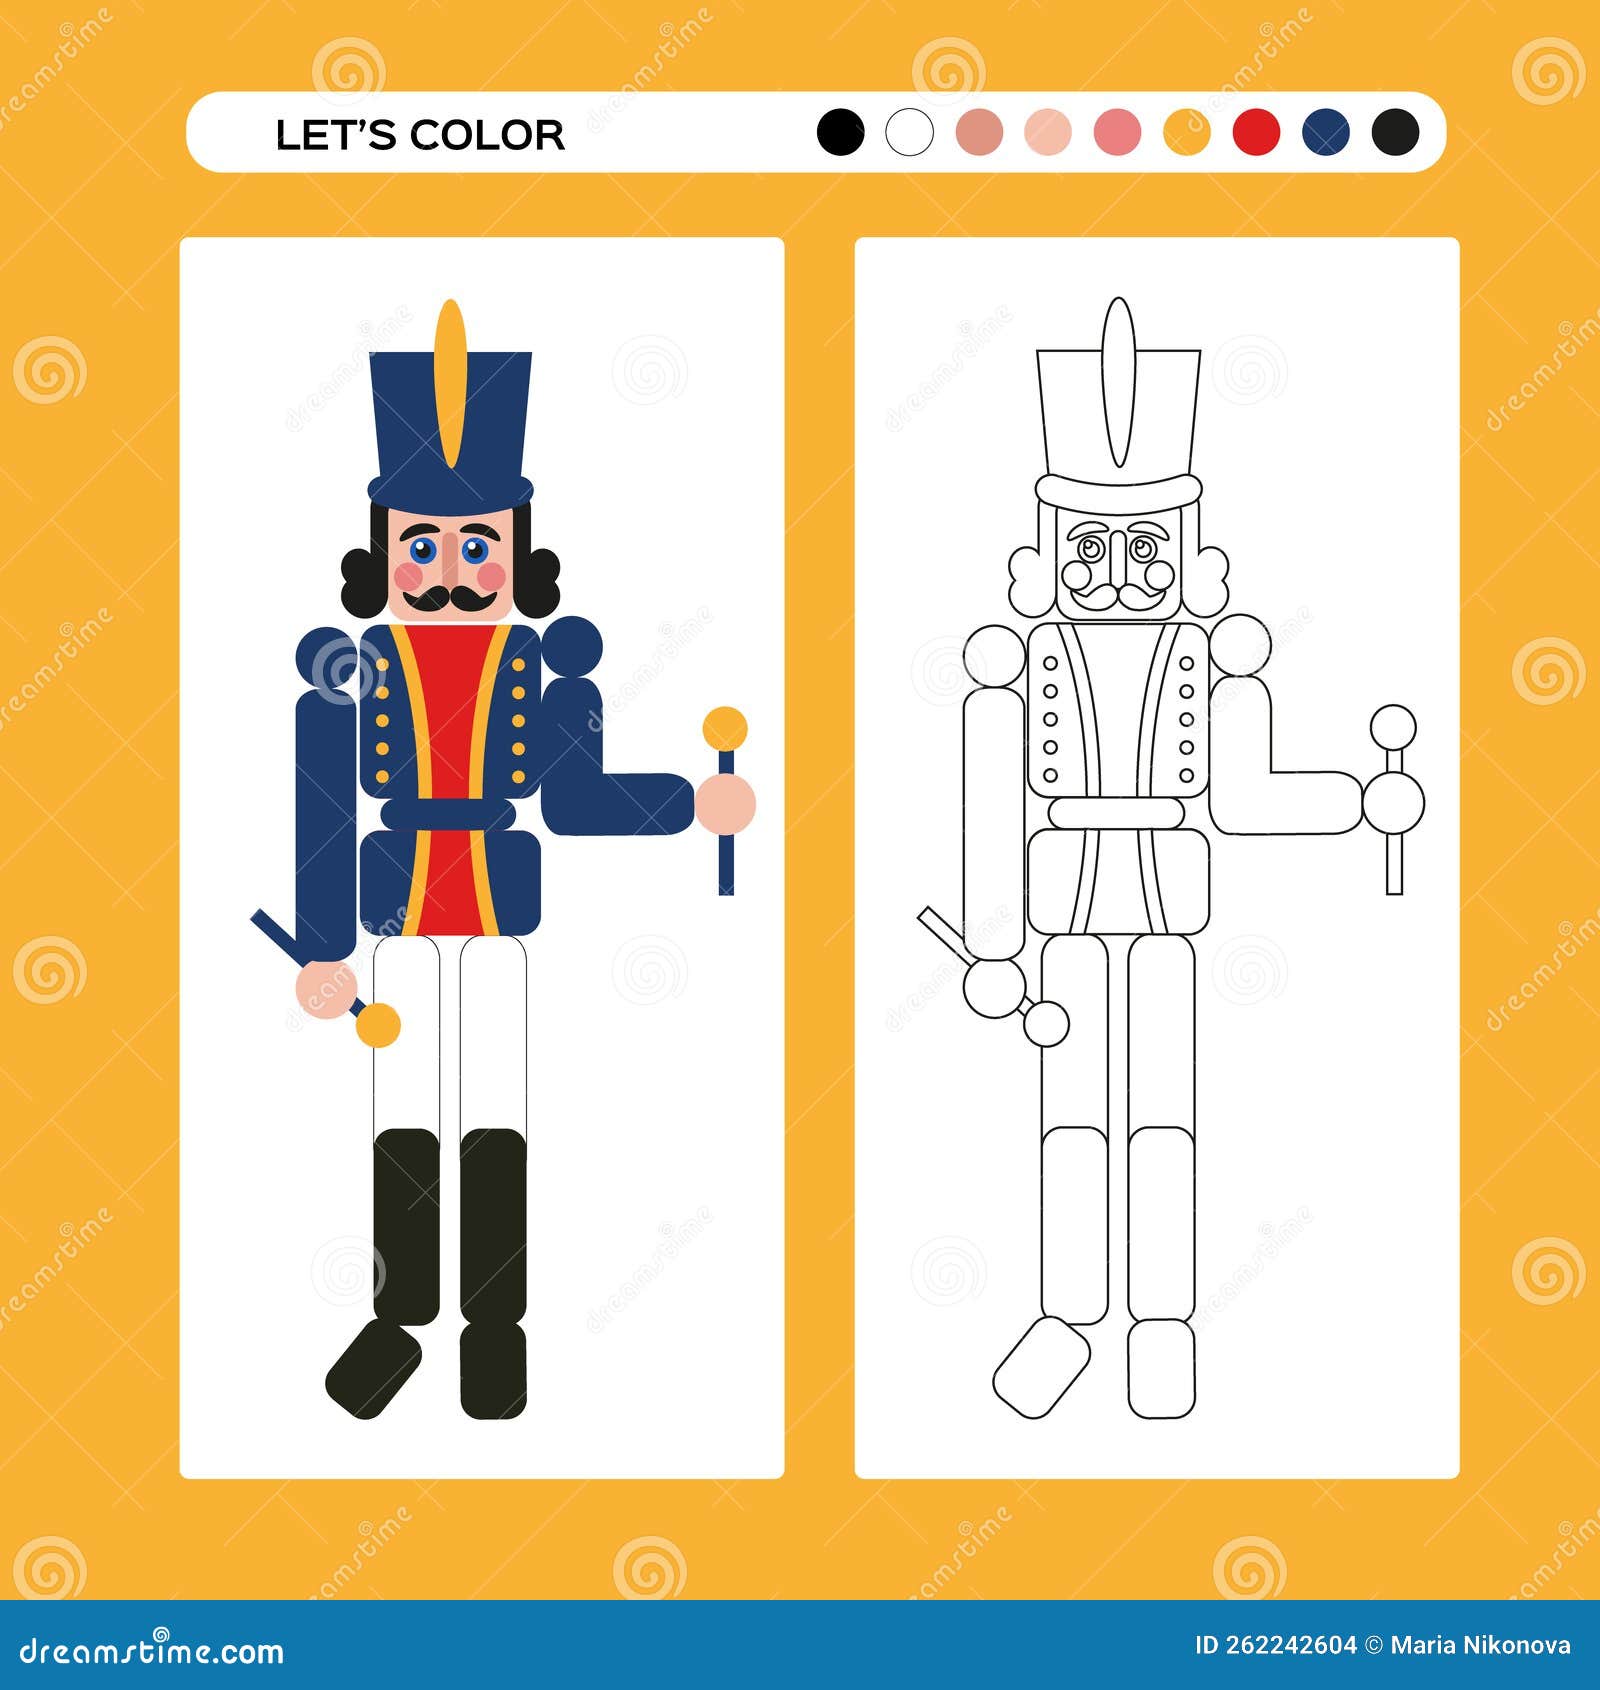 Nutcracker christmas coloring page kids educational game in flat and outline design winter coloring book stock vector